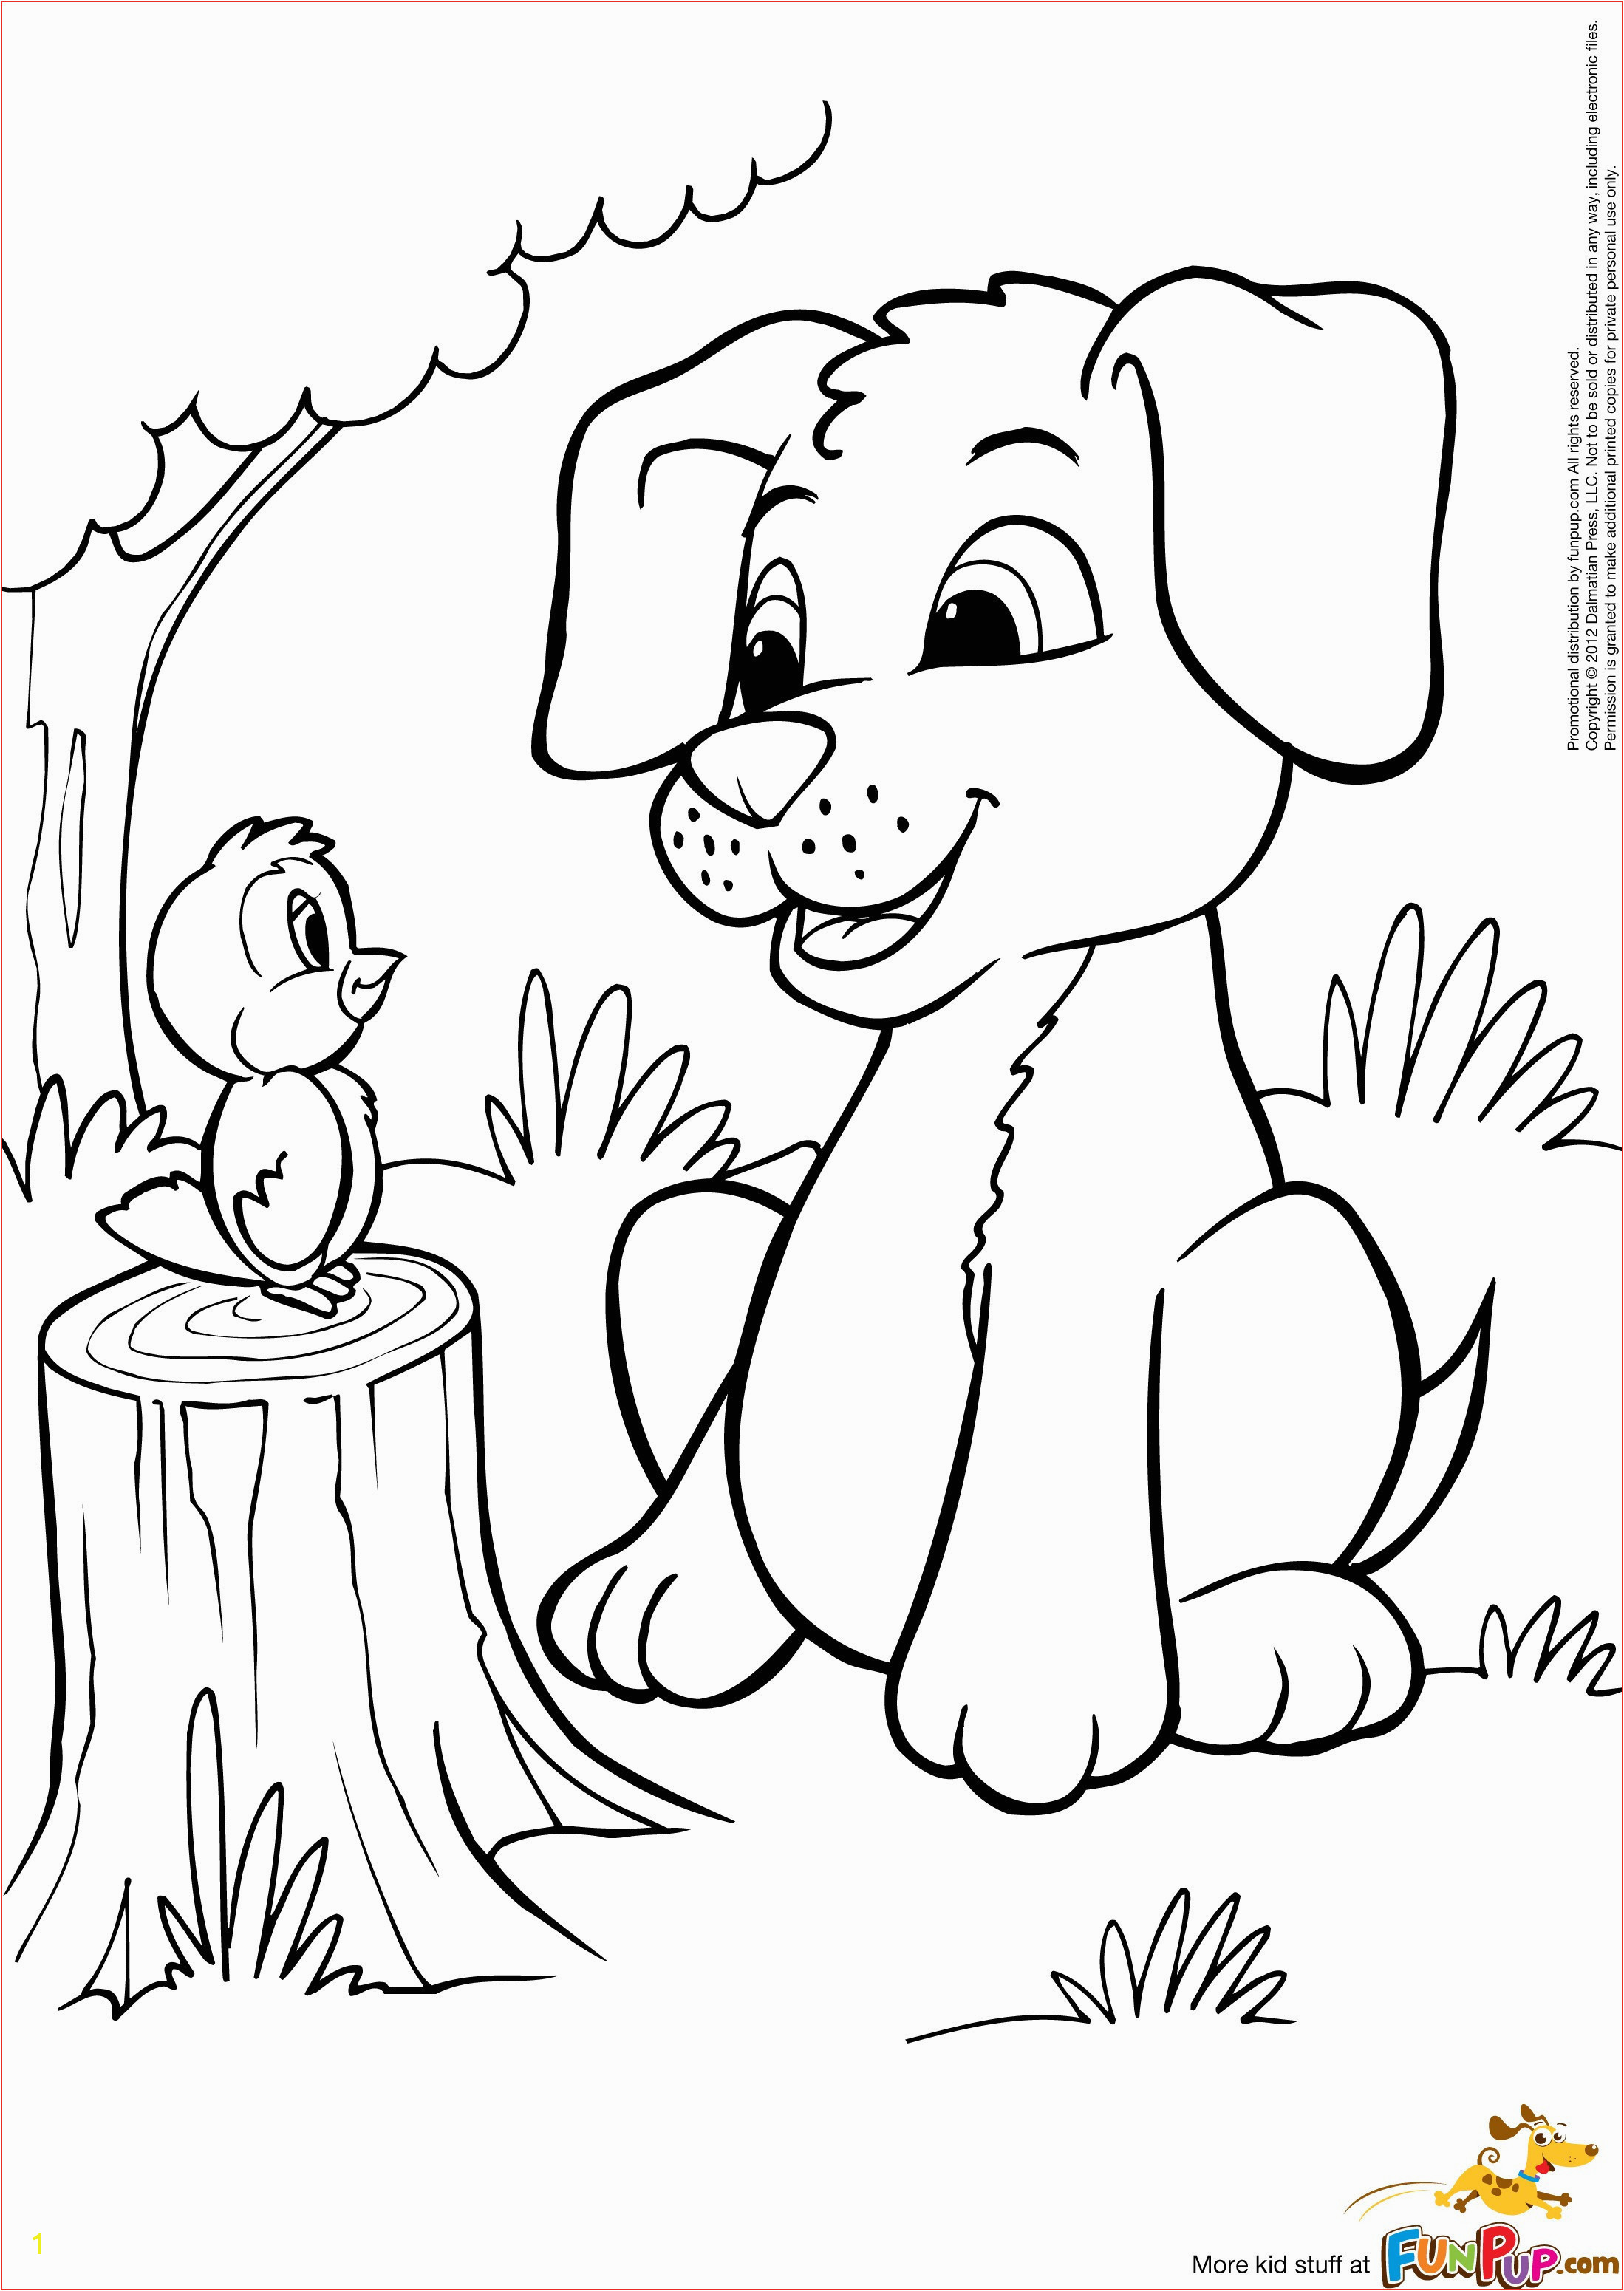 Litten Coloring Pages How to Draw A Puppy Step by Step Puppy and Kitten Coloring